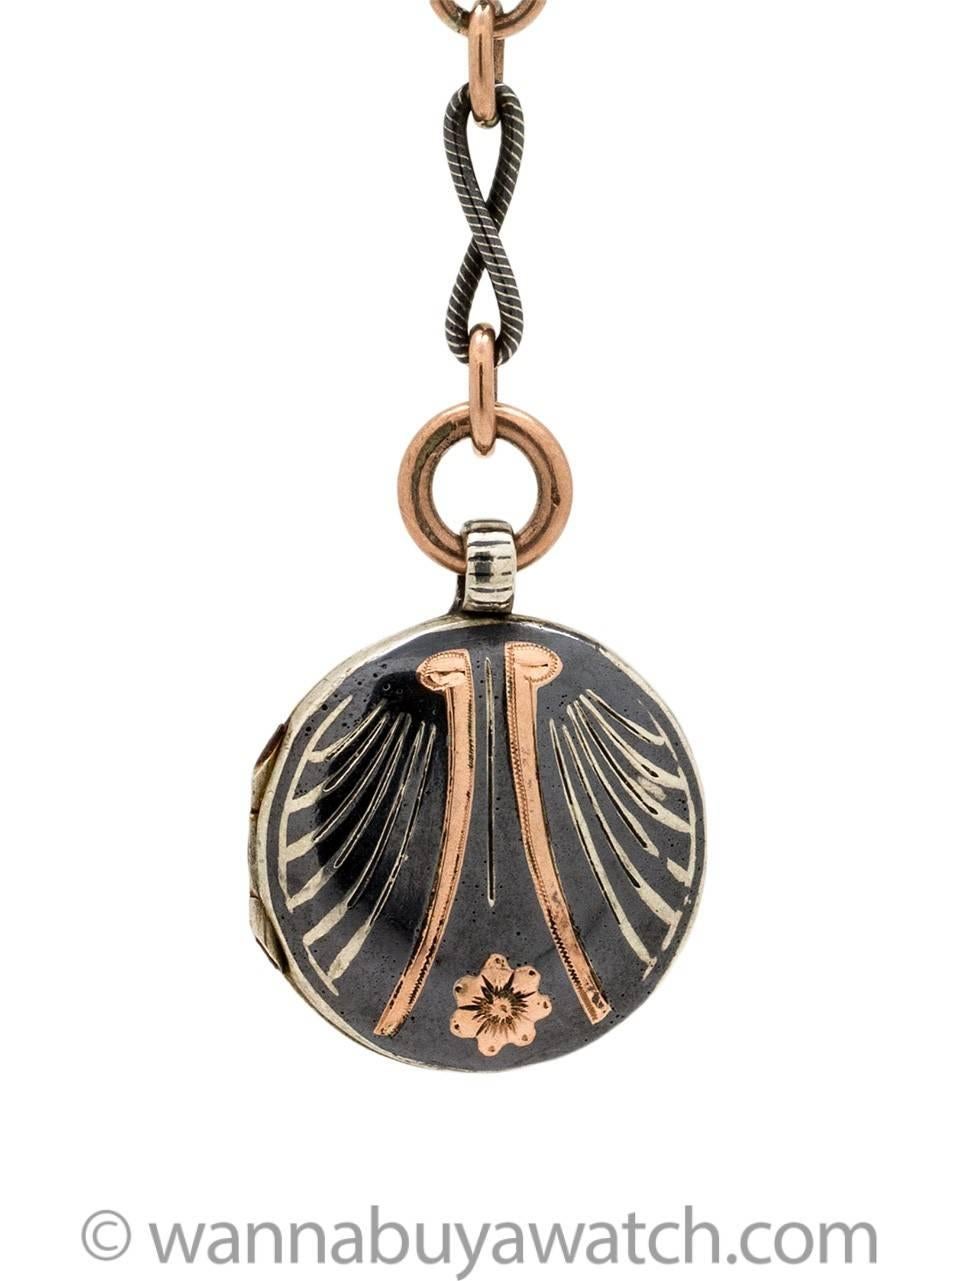 Striking Niello sterling silver and rose gold filled locket on 17 inch chain, with gorgeous contrasting etched, swirled links. Large, etched spring ring bail clasp on detachable locket pendant, which is 3 inches long. The locket itself is adorned